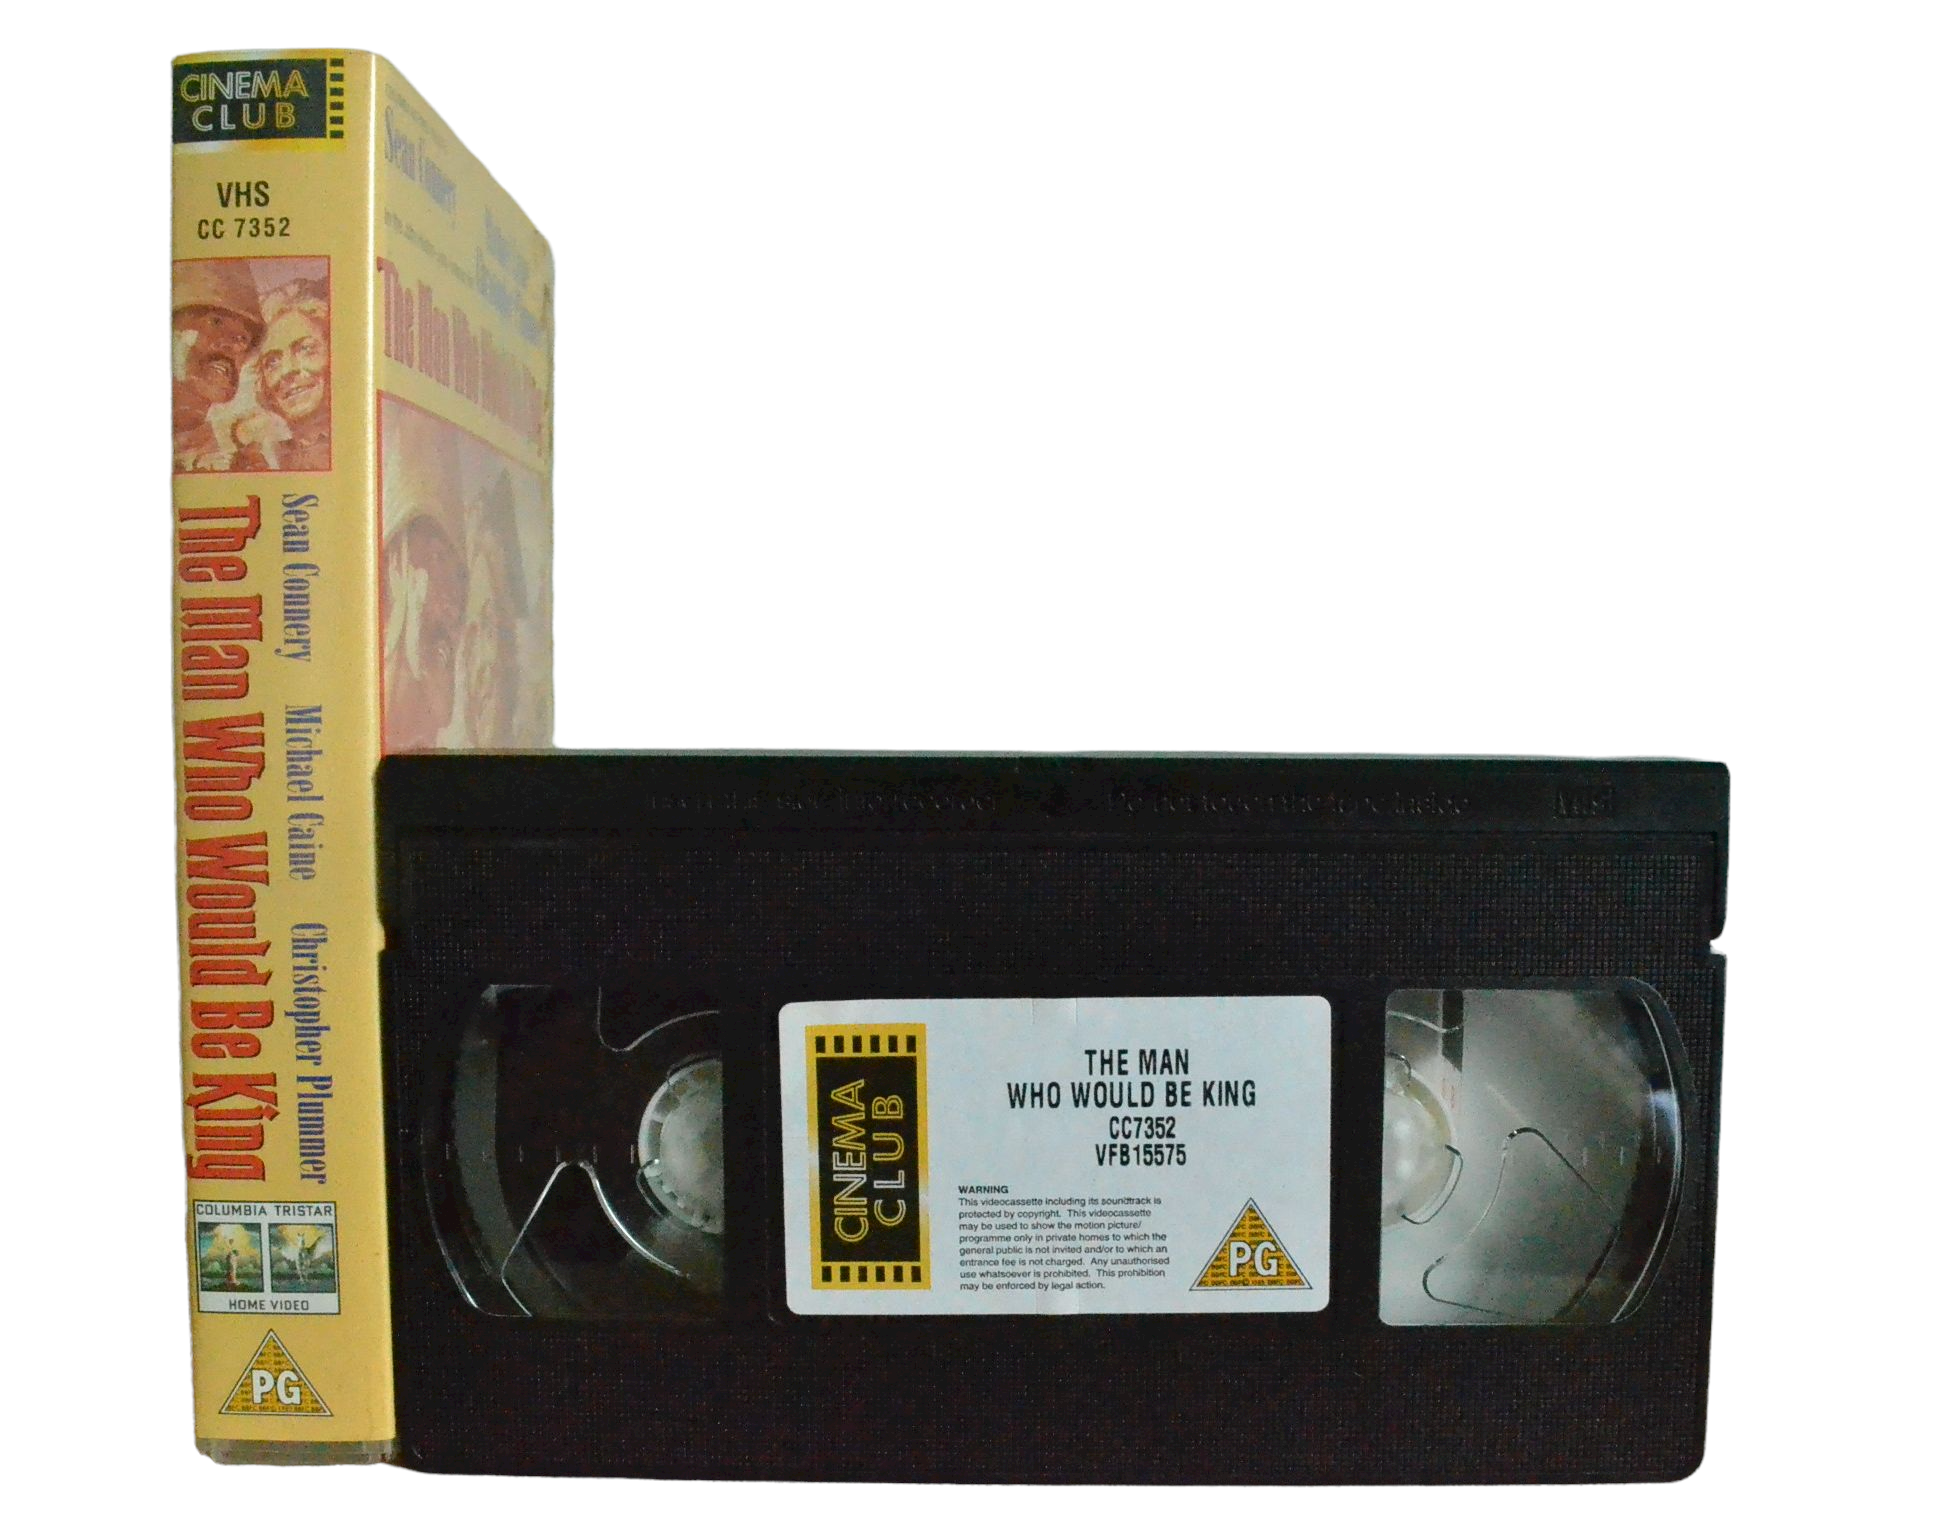 The Man Who Would Be King - Sean Connery - Cinema Club - Vintage - Pal VHS-